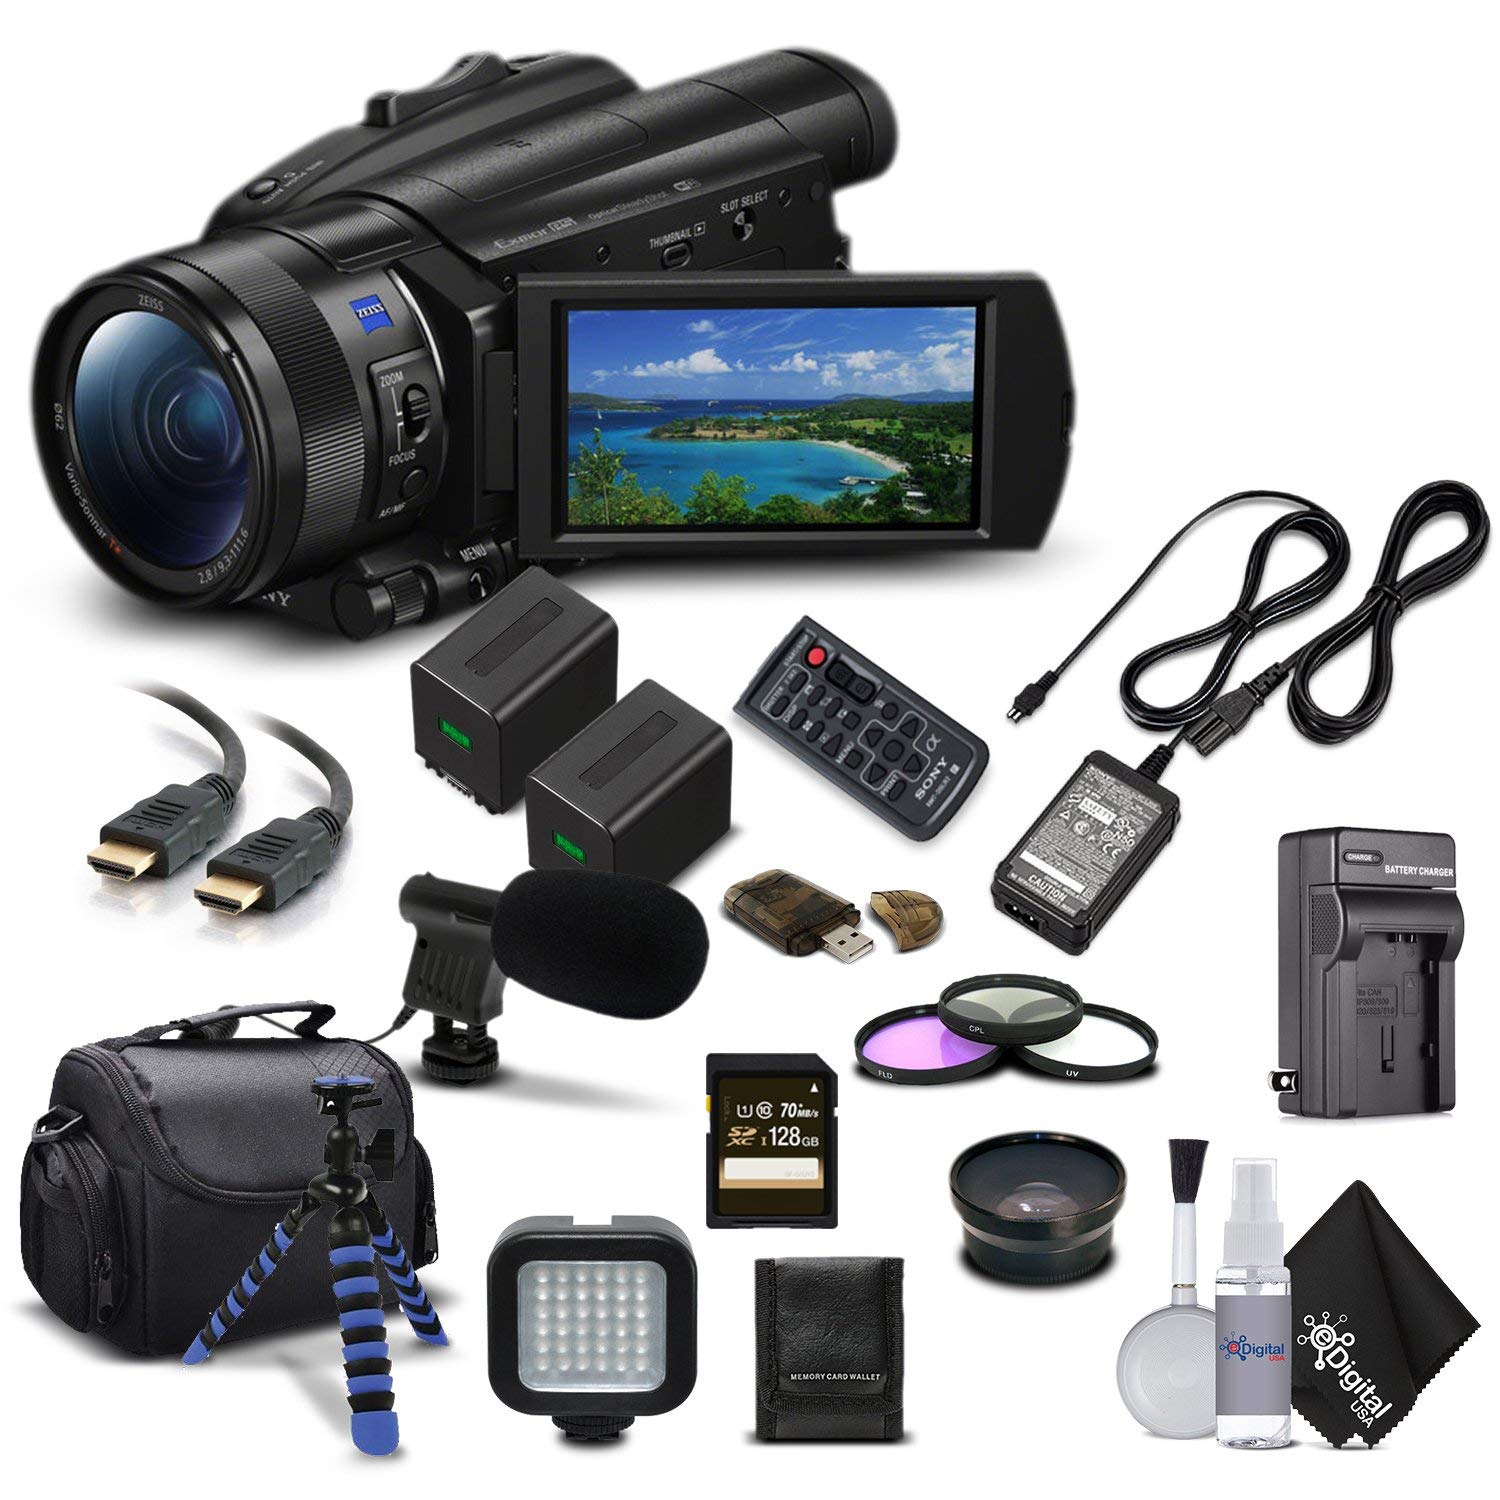 Sony Handycam FDR-AX700 4K HD Video Camera Camcorder + Extra Battery and Charger + 3 Piece Filter Kit + Wide Angle Lens